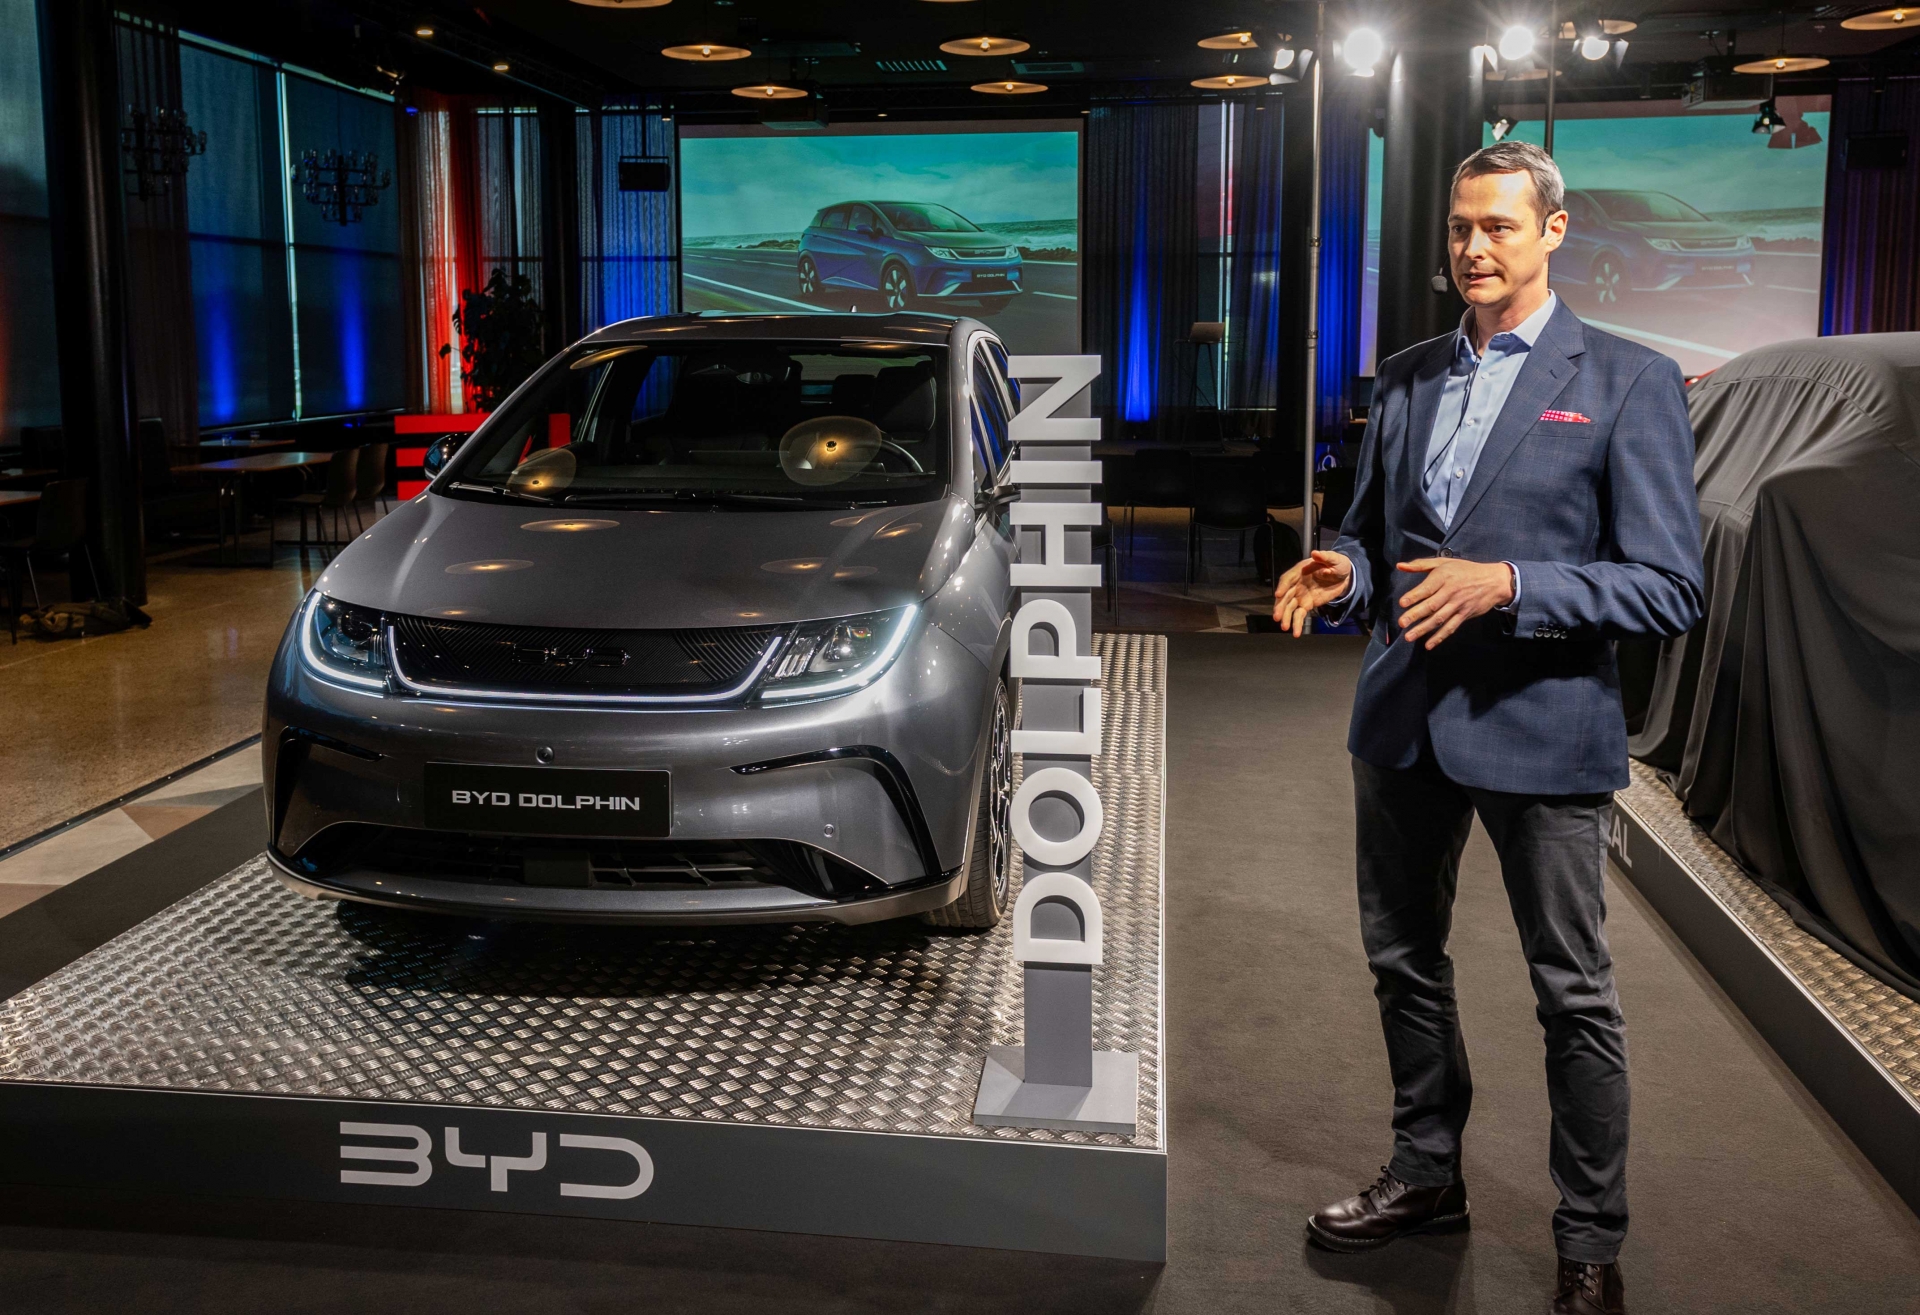 The-BYD-DOLPHIN-in-Finland-Launch-Event